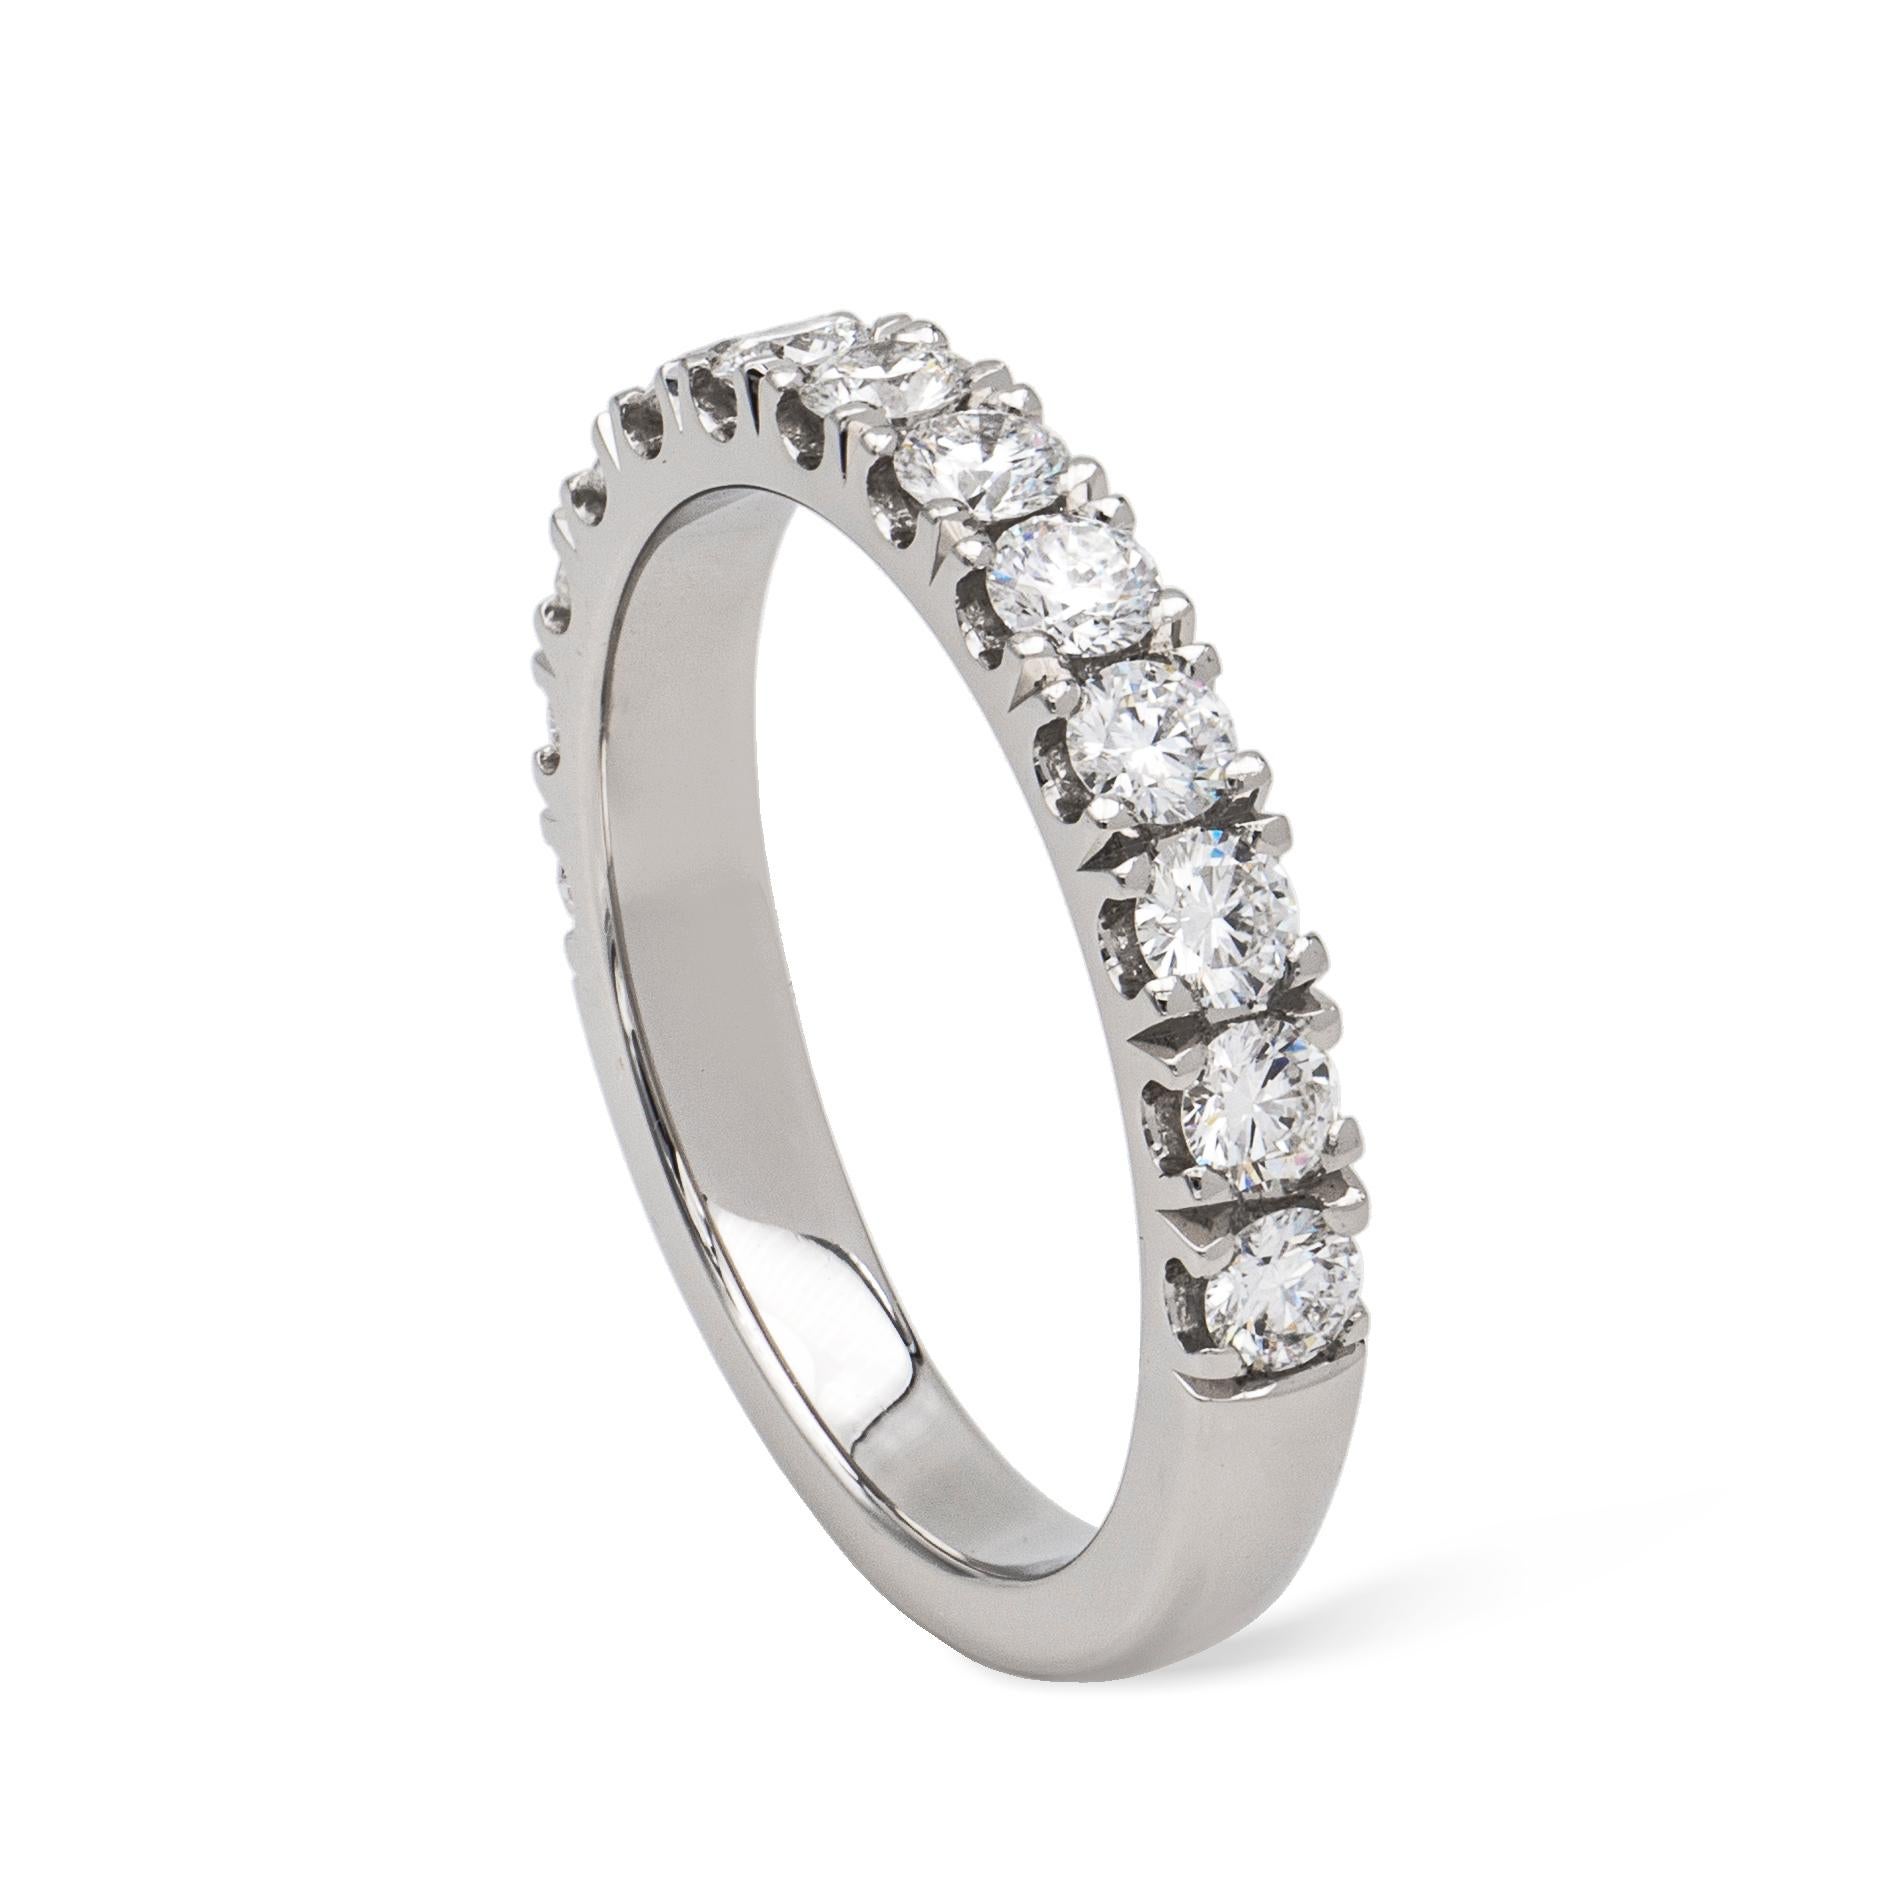 A platinum diamond half eternity ring, thirteen round brilliant cut diamond, total weight 0.79 carat, in castle claw settings on plain shank, hallmarked 950 platinum, London 2020, maker FEU, size K 1/2, gross weight 5.0grams.

This ring is